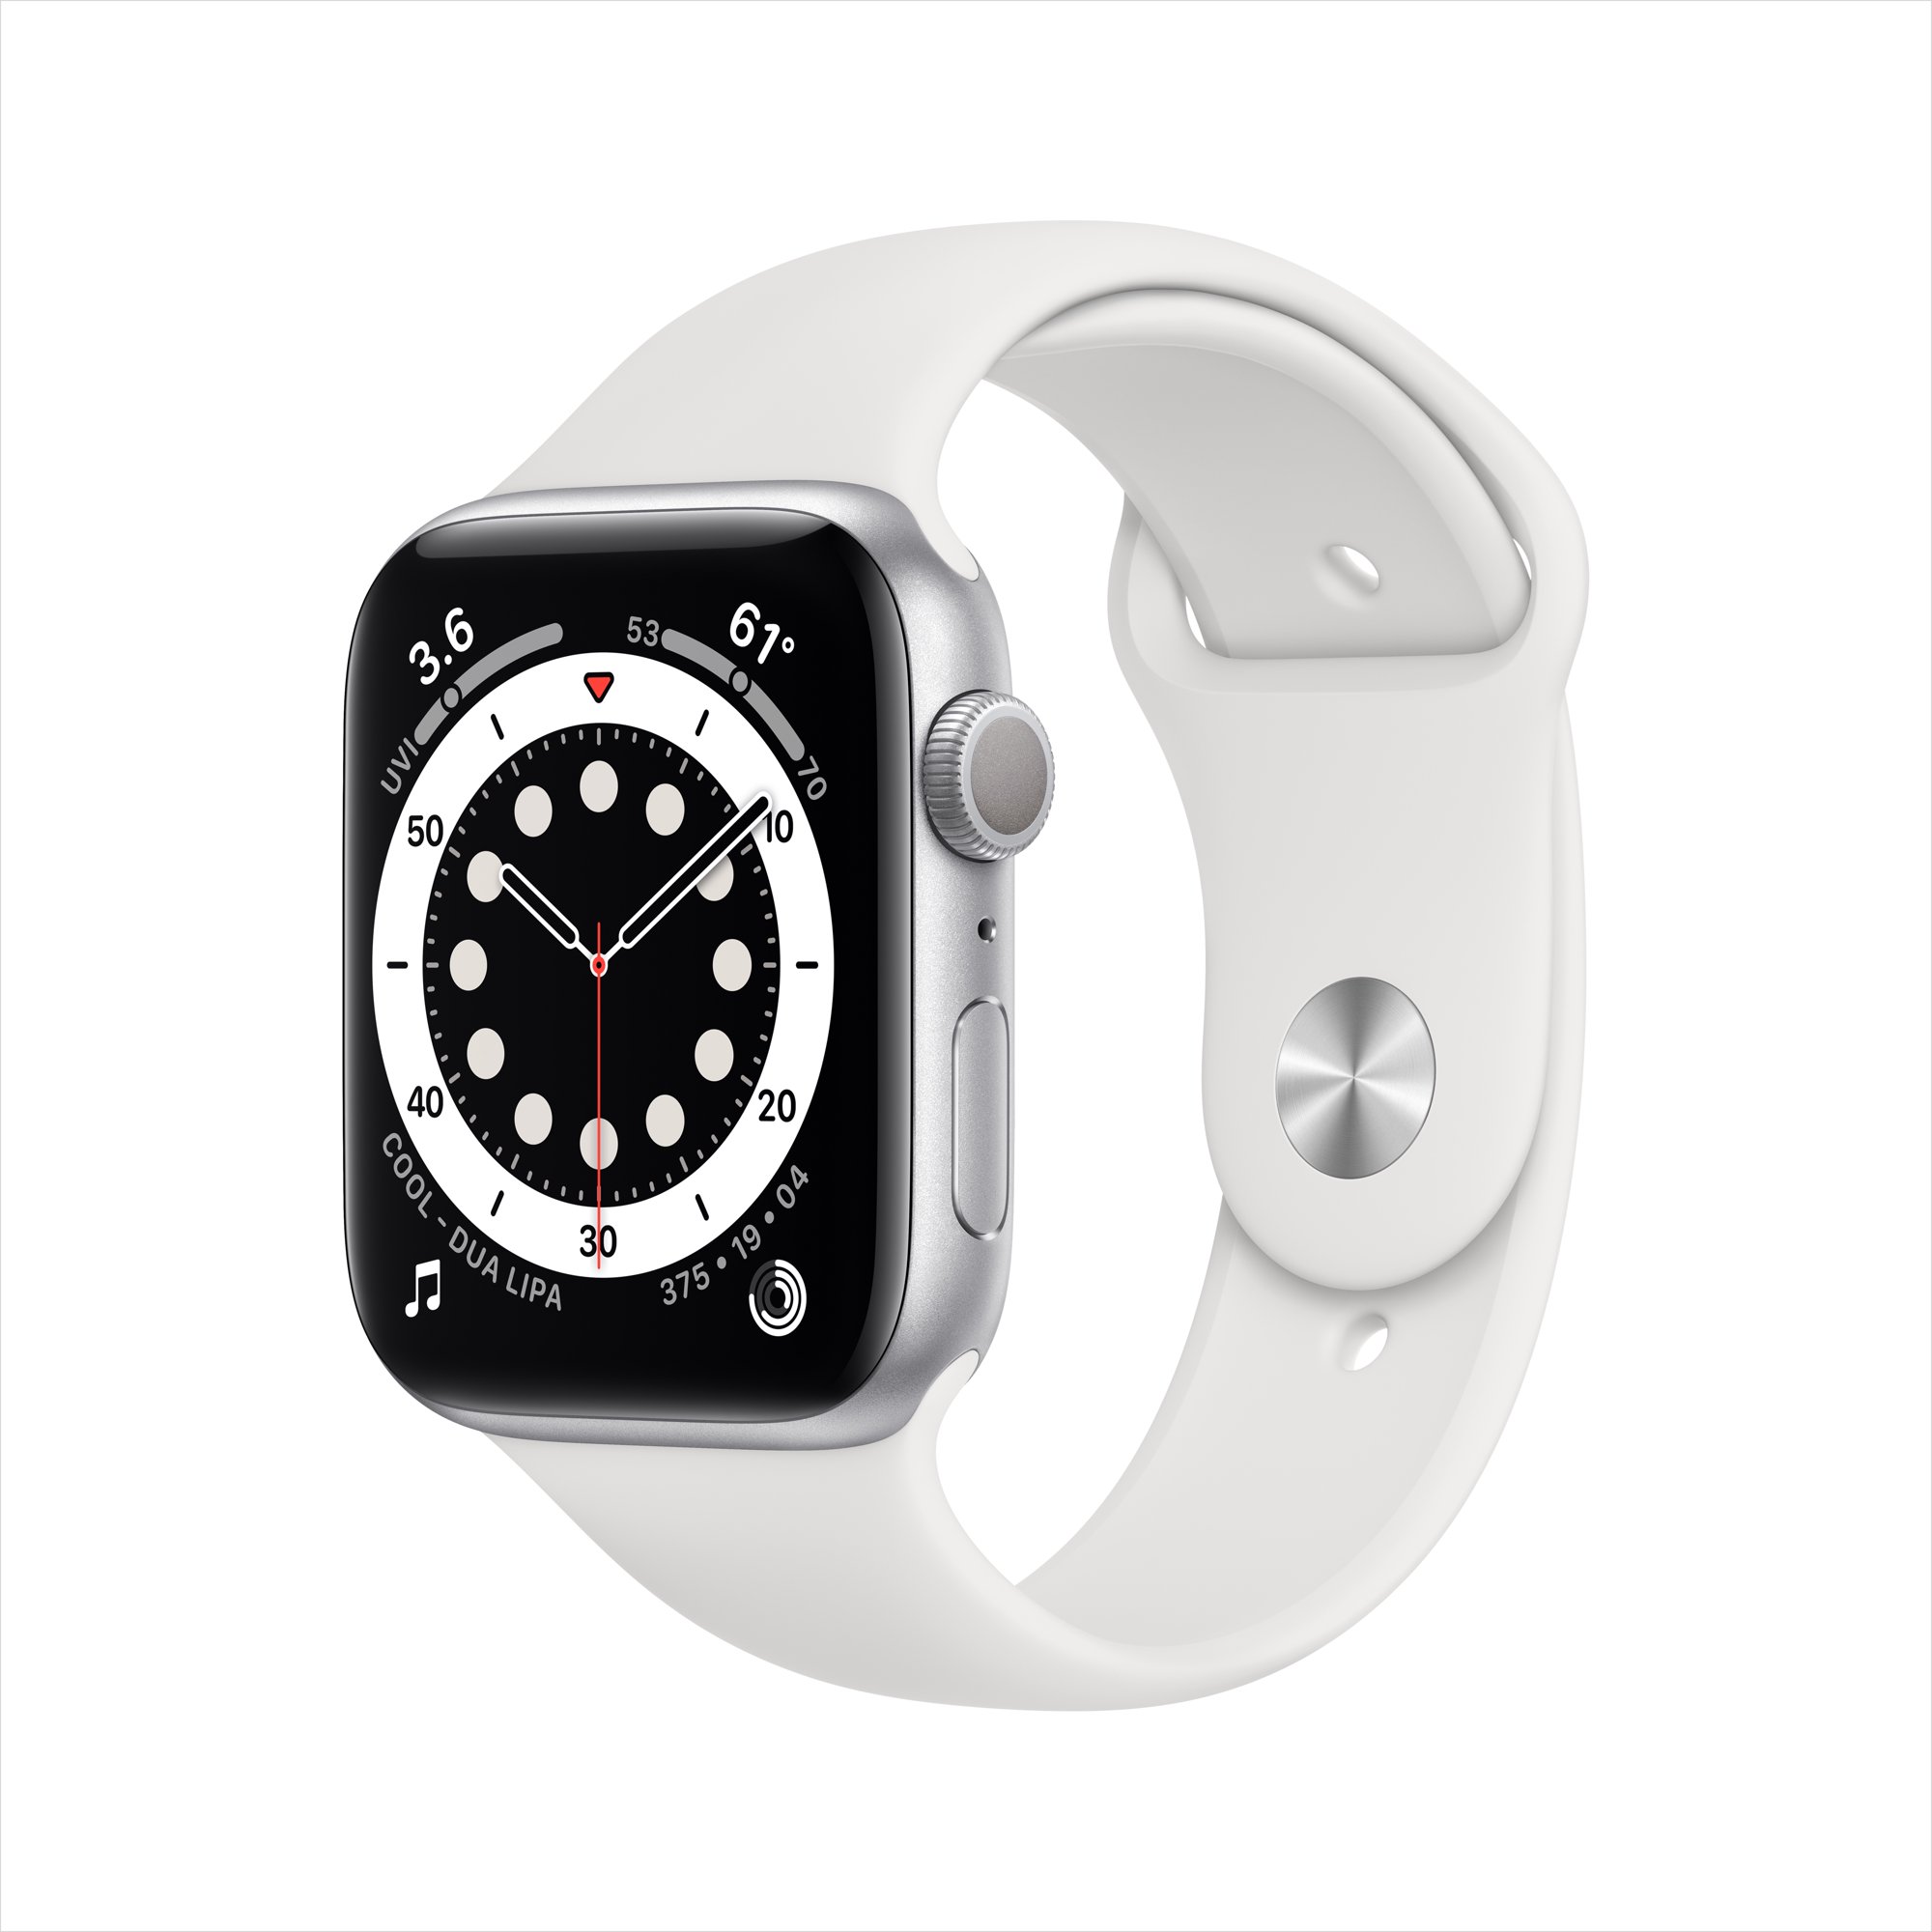 Apple Watch Series 6 GPS, 44mm Silver Aluminum Case with White Sport Band - Regular $245